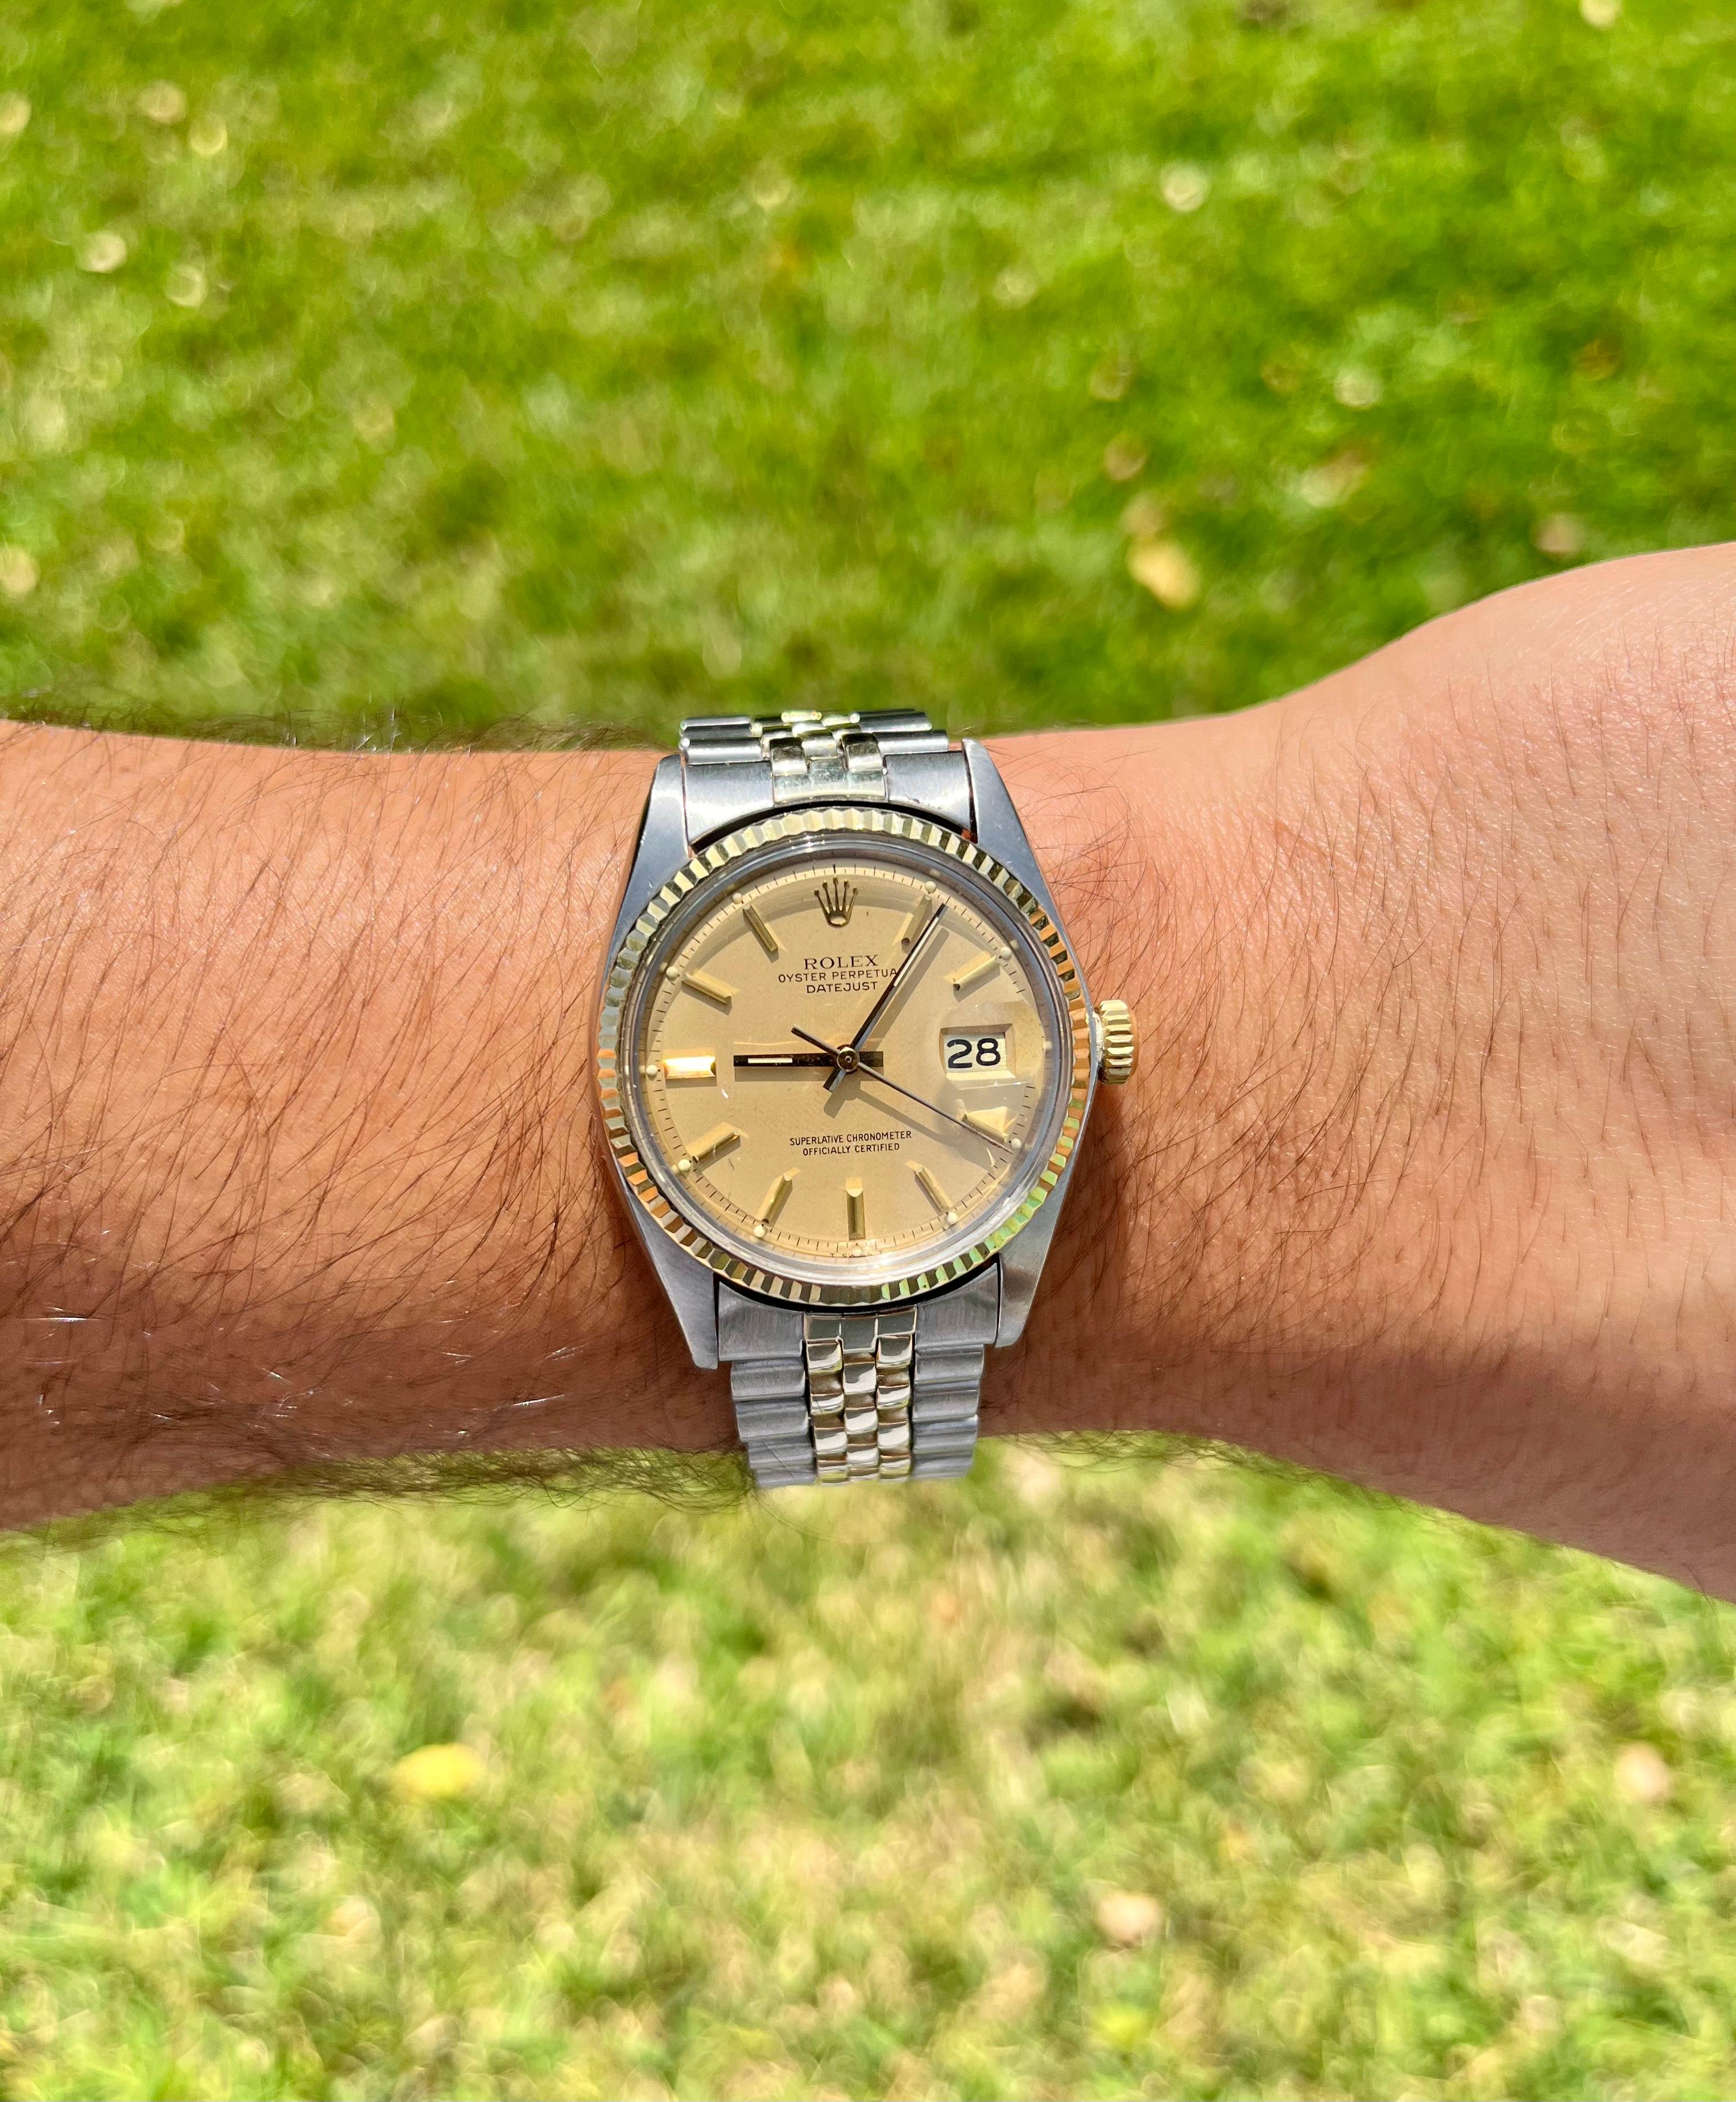 Vintage Rolex Datejust Two Tone Watch with Jubilee Bracelet For Sale 2